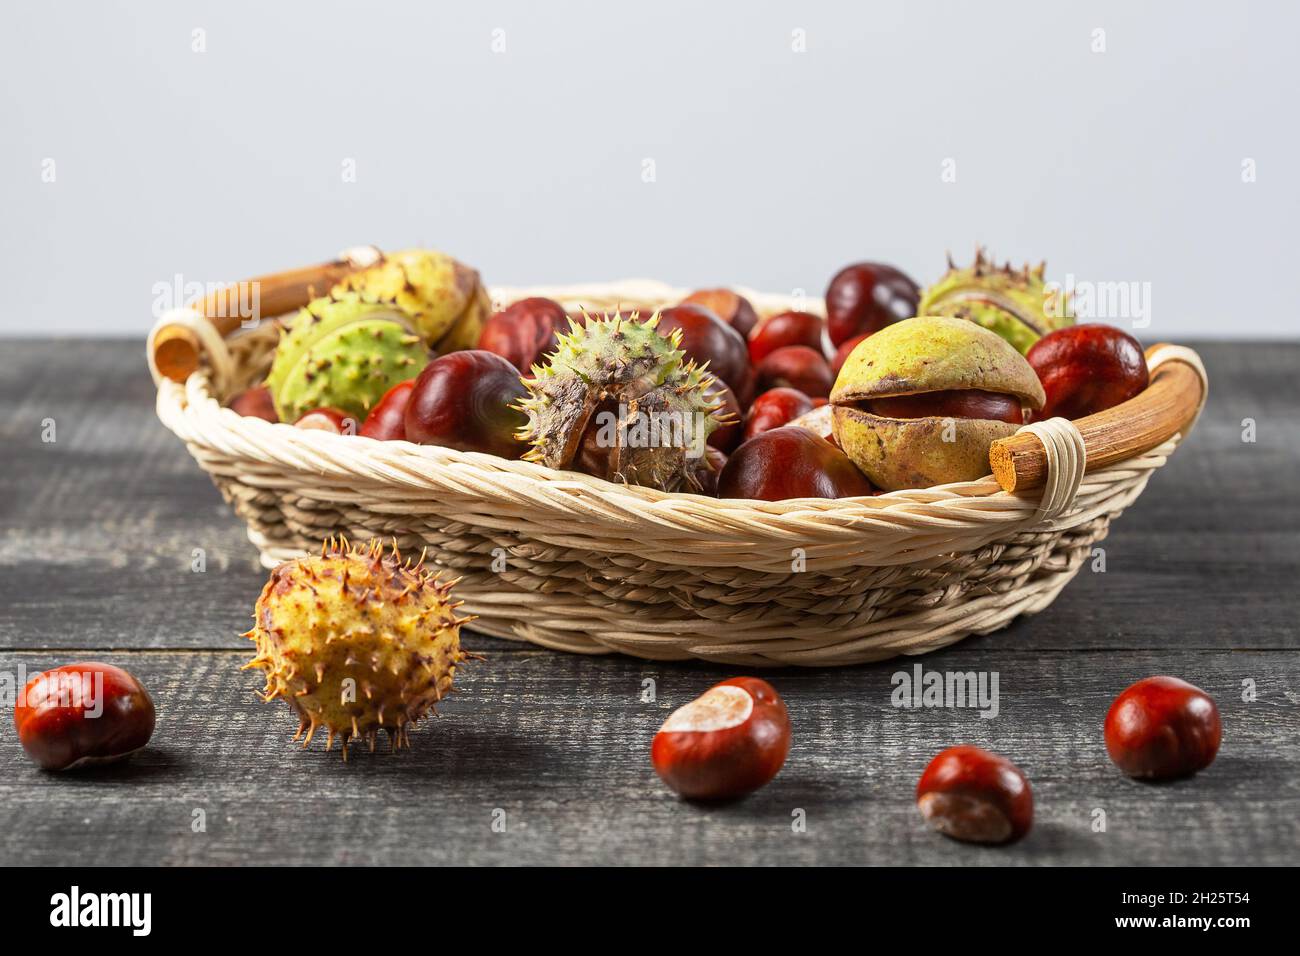 Chestnuts in a basket on a wooden background. Stock Photo